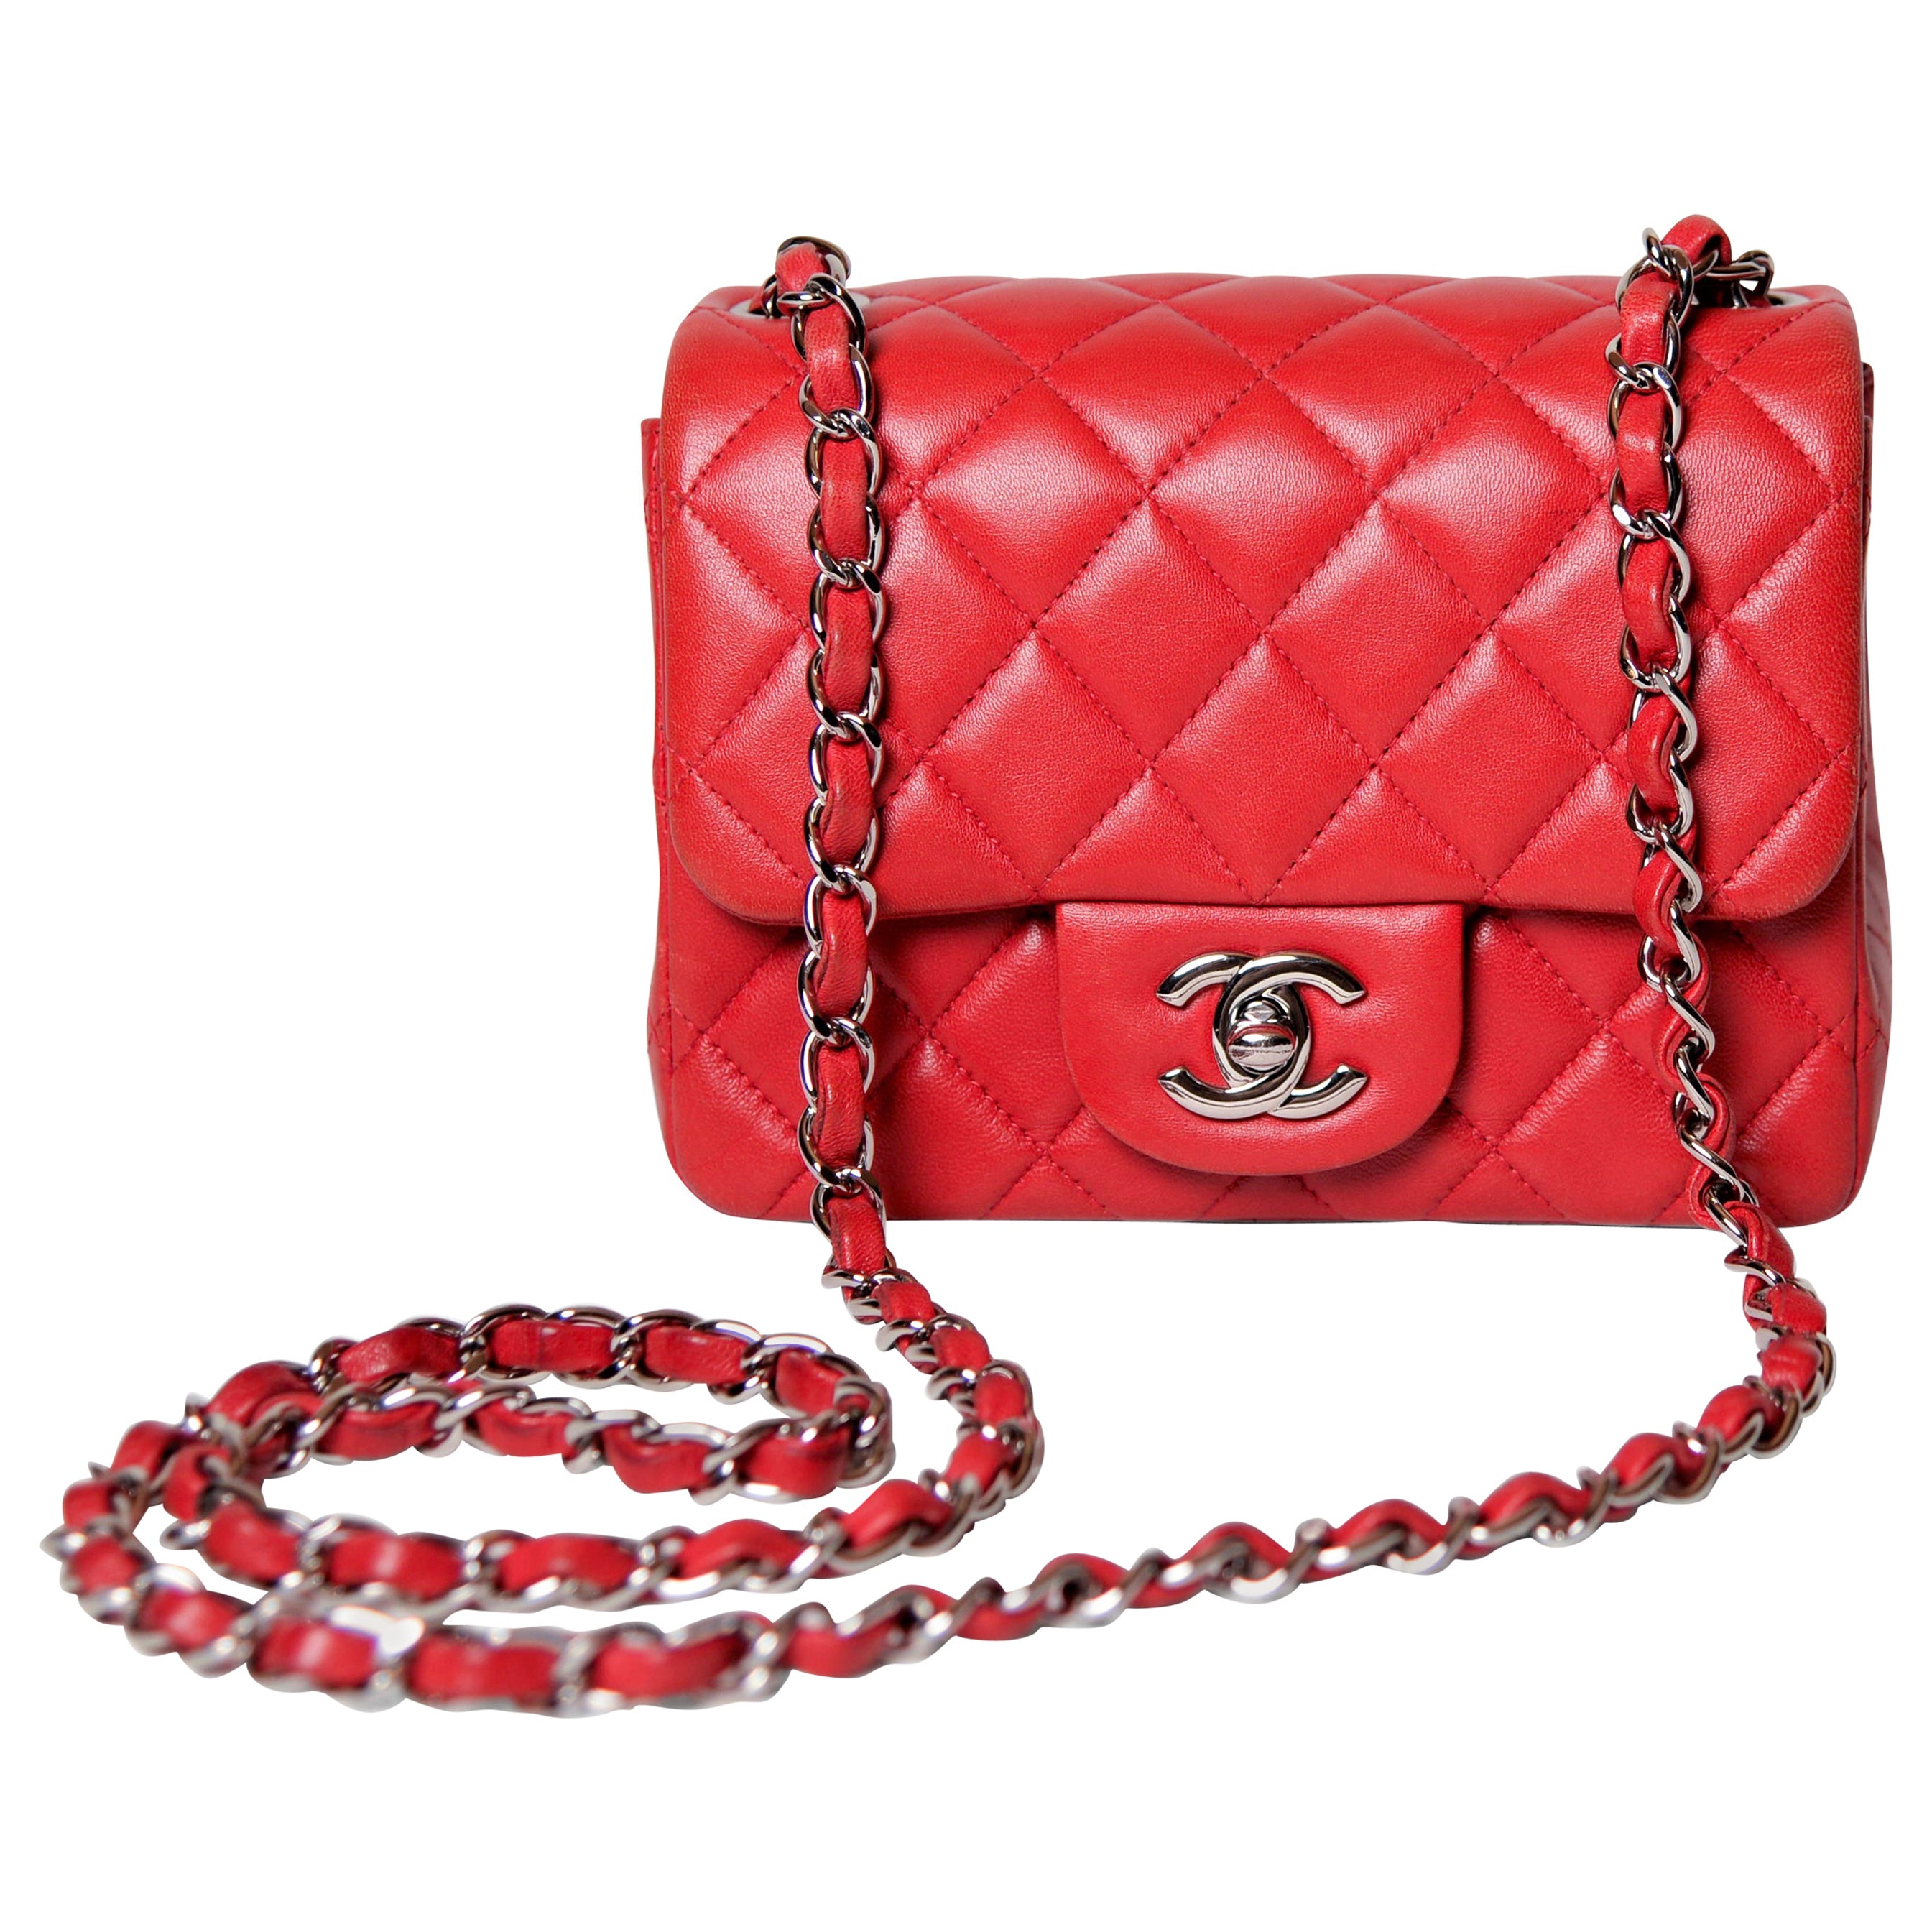 Chanel Red Quilted Lambskin Leather Mini Flap Bag